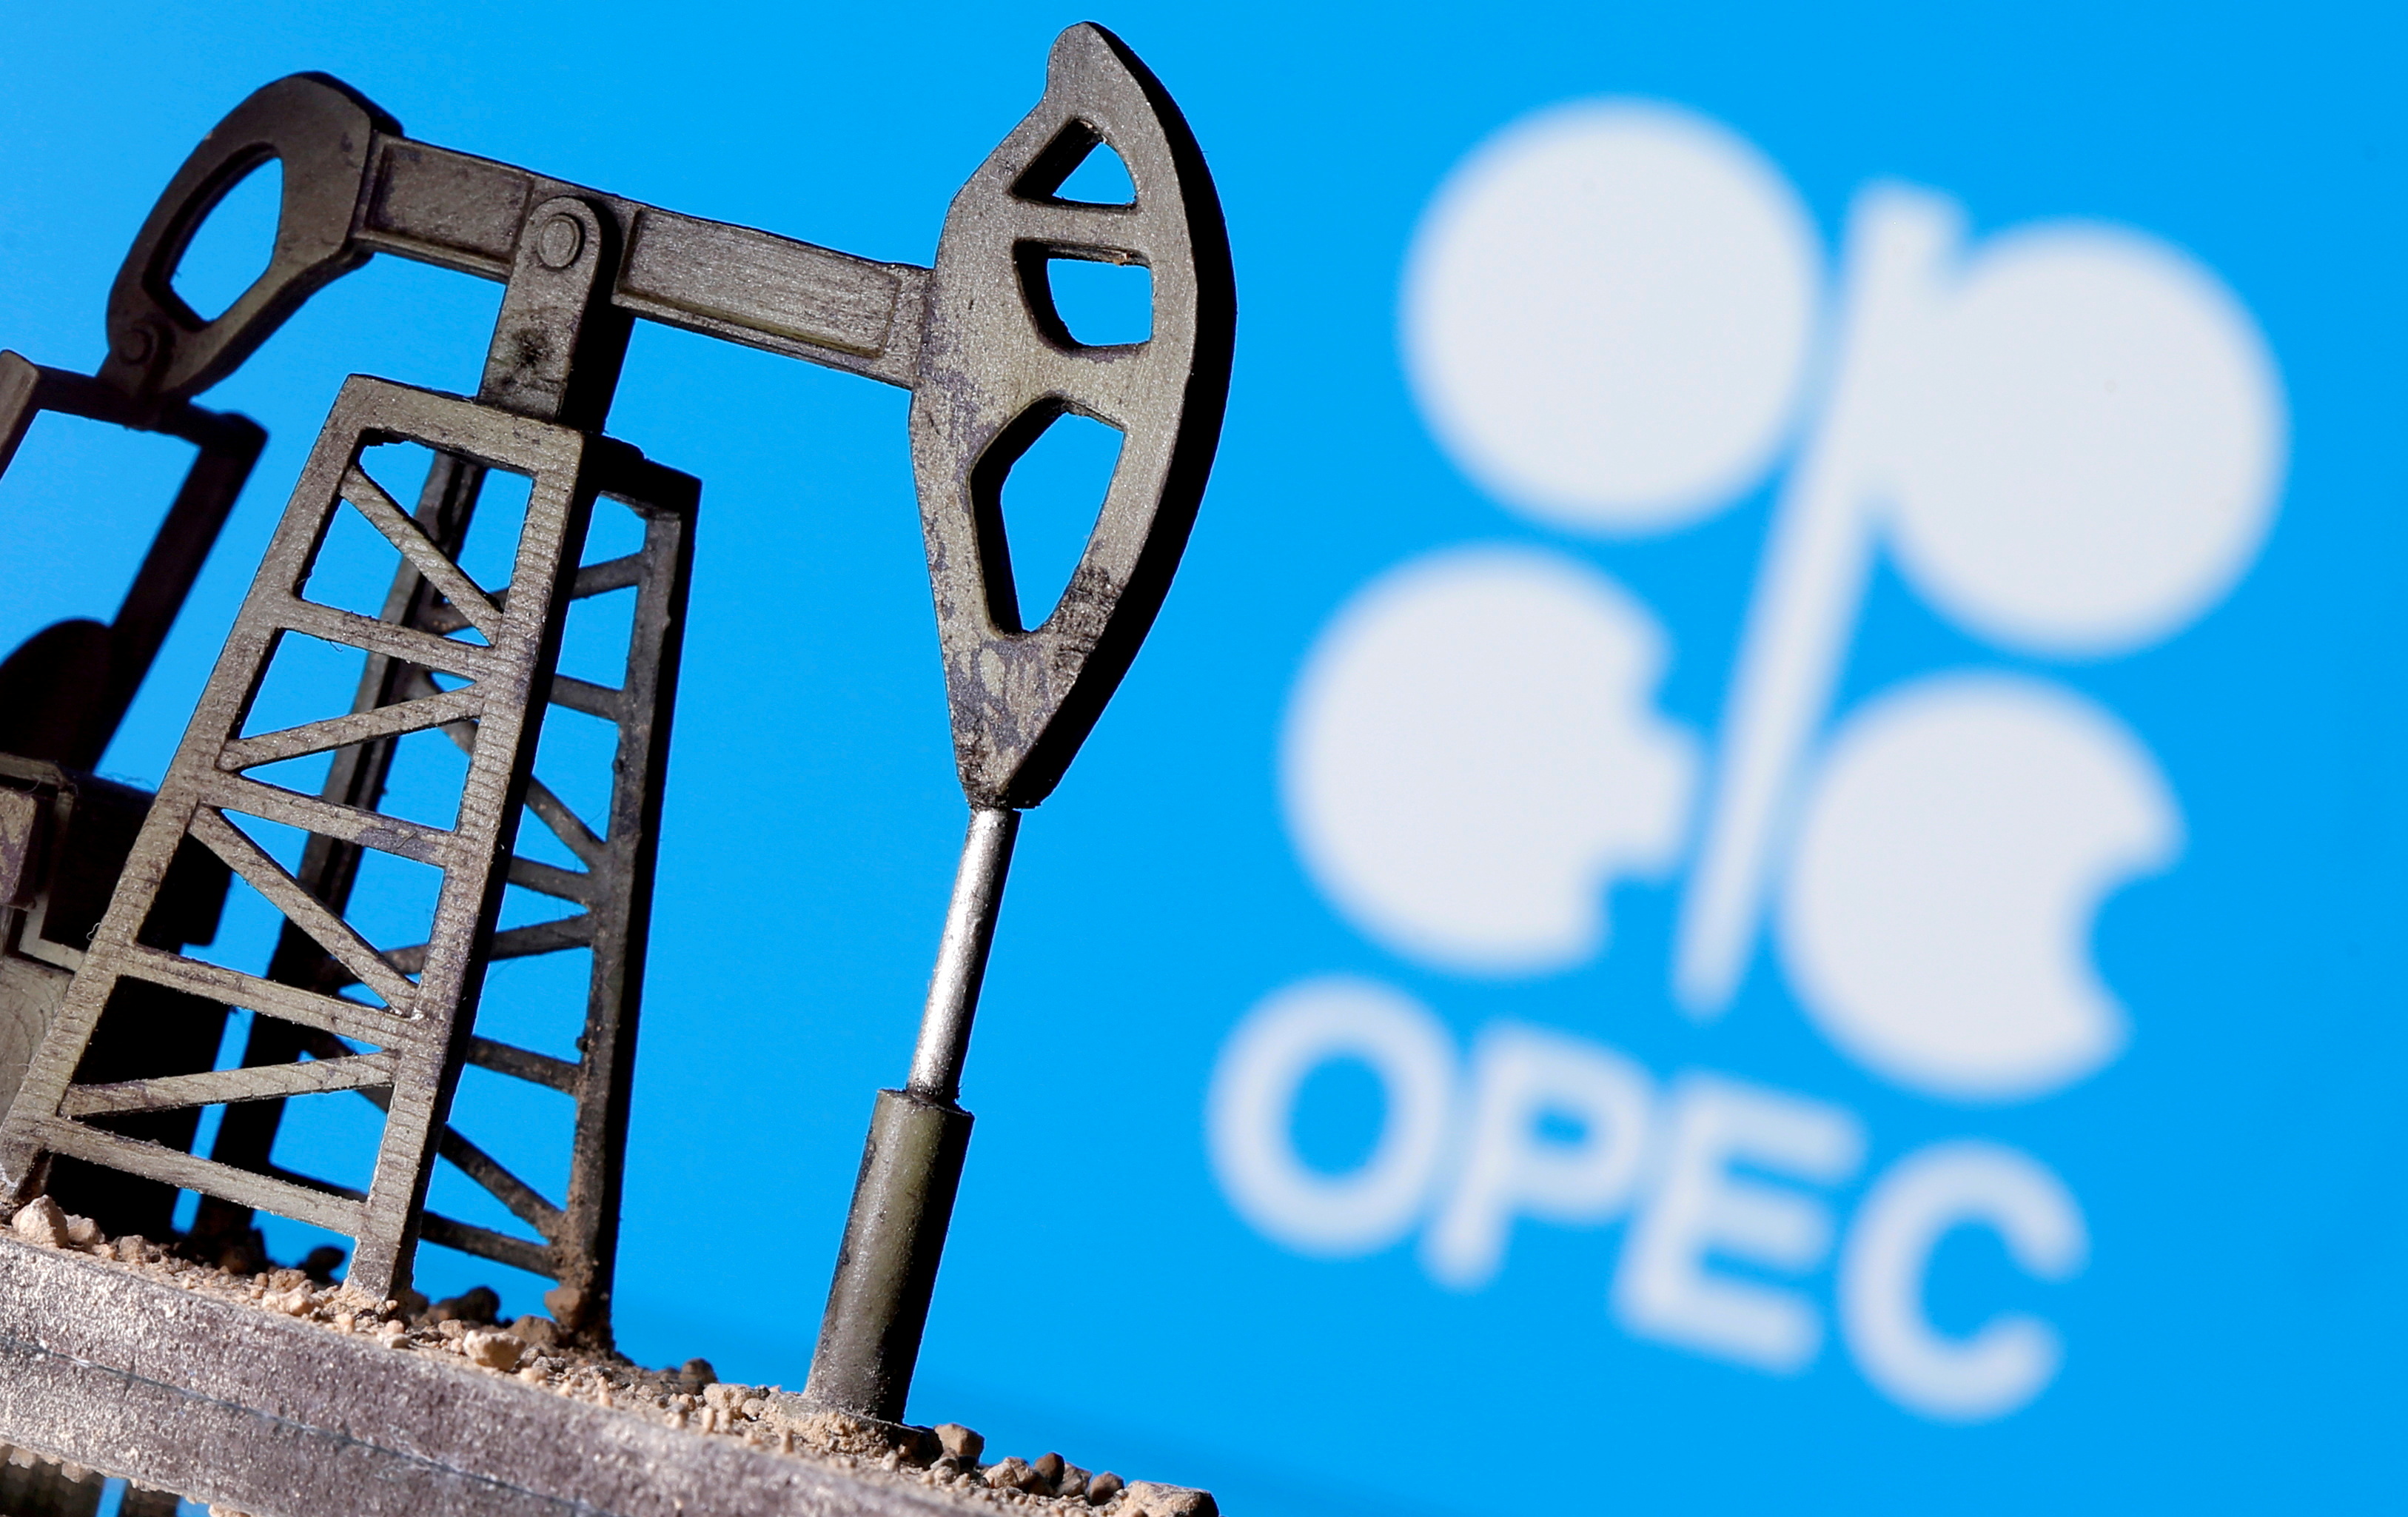 A 3D printed oil pump jack is seen in front of displayed OPEC logo in this illustration picture, April 14, 2020. REUTERS/Dado Ruvic//File Photo